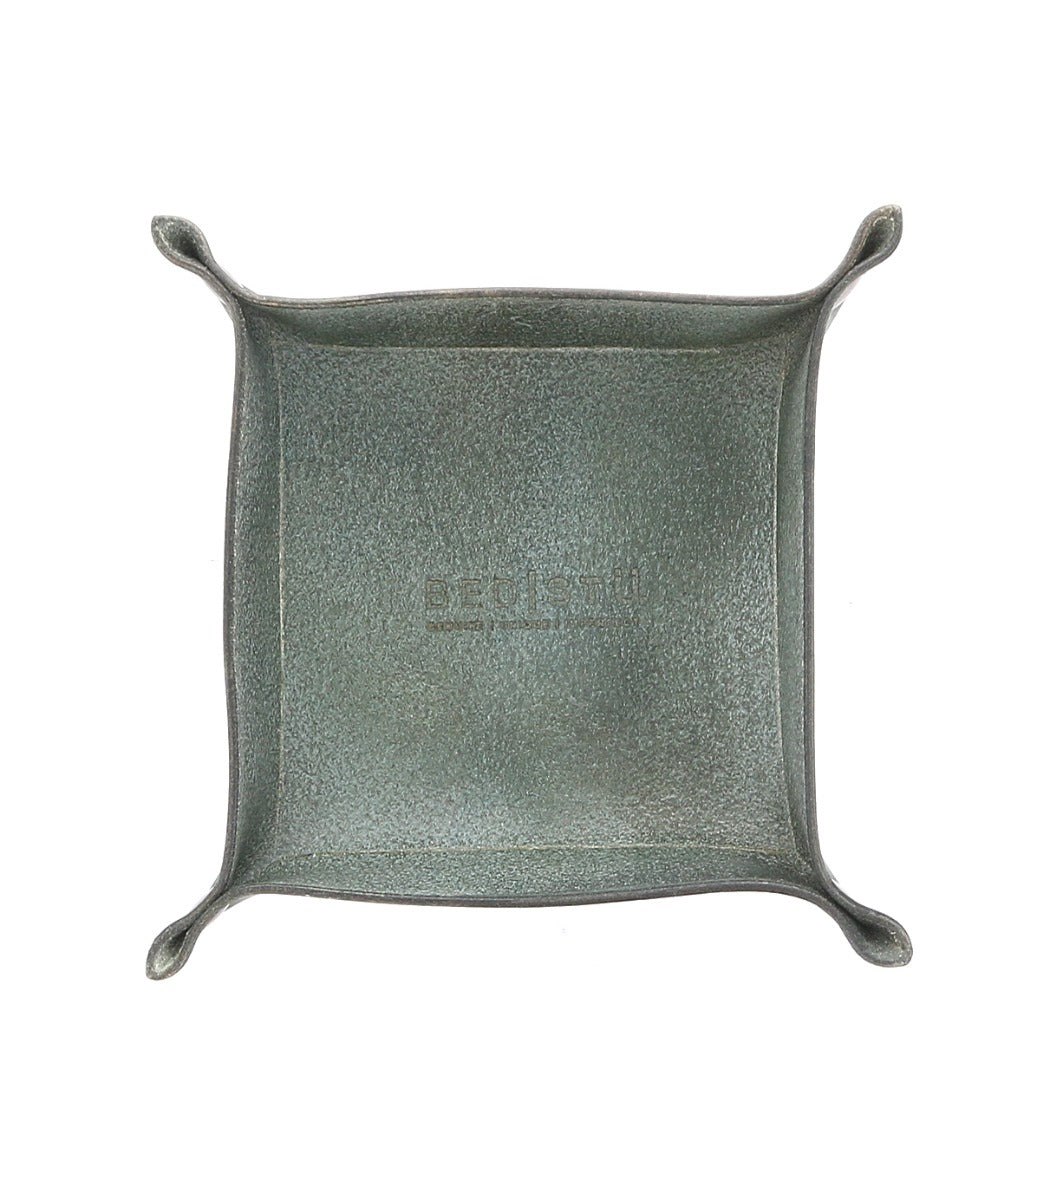 An Expanse metal tray with a handle on it.